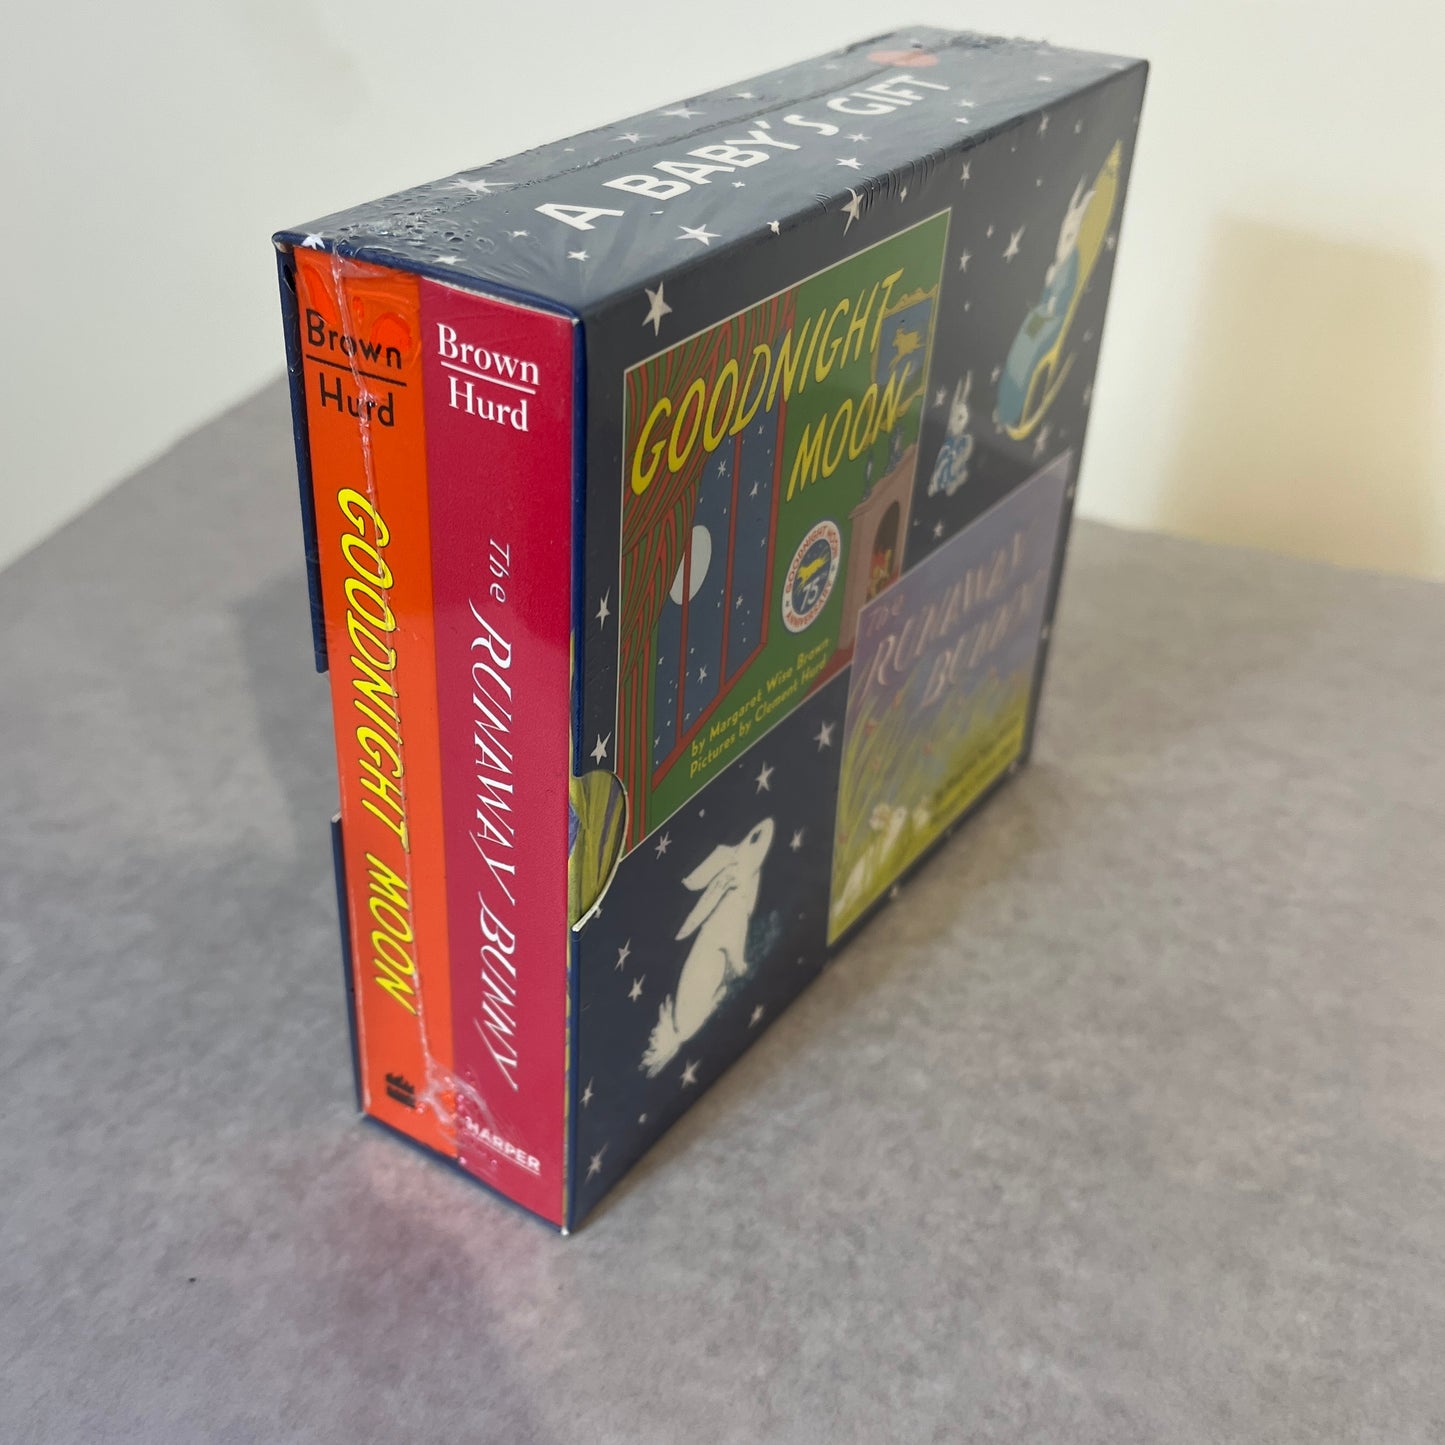 Boxed set of Goodnight Moon and The Runaway Bunny Board Books